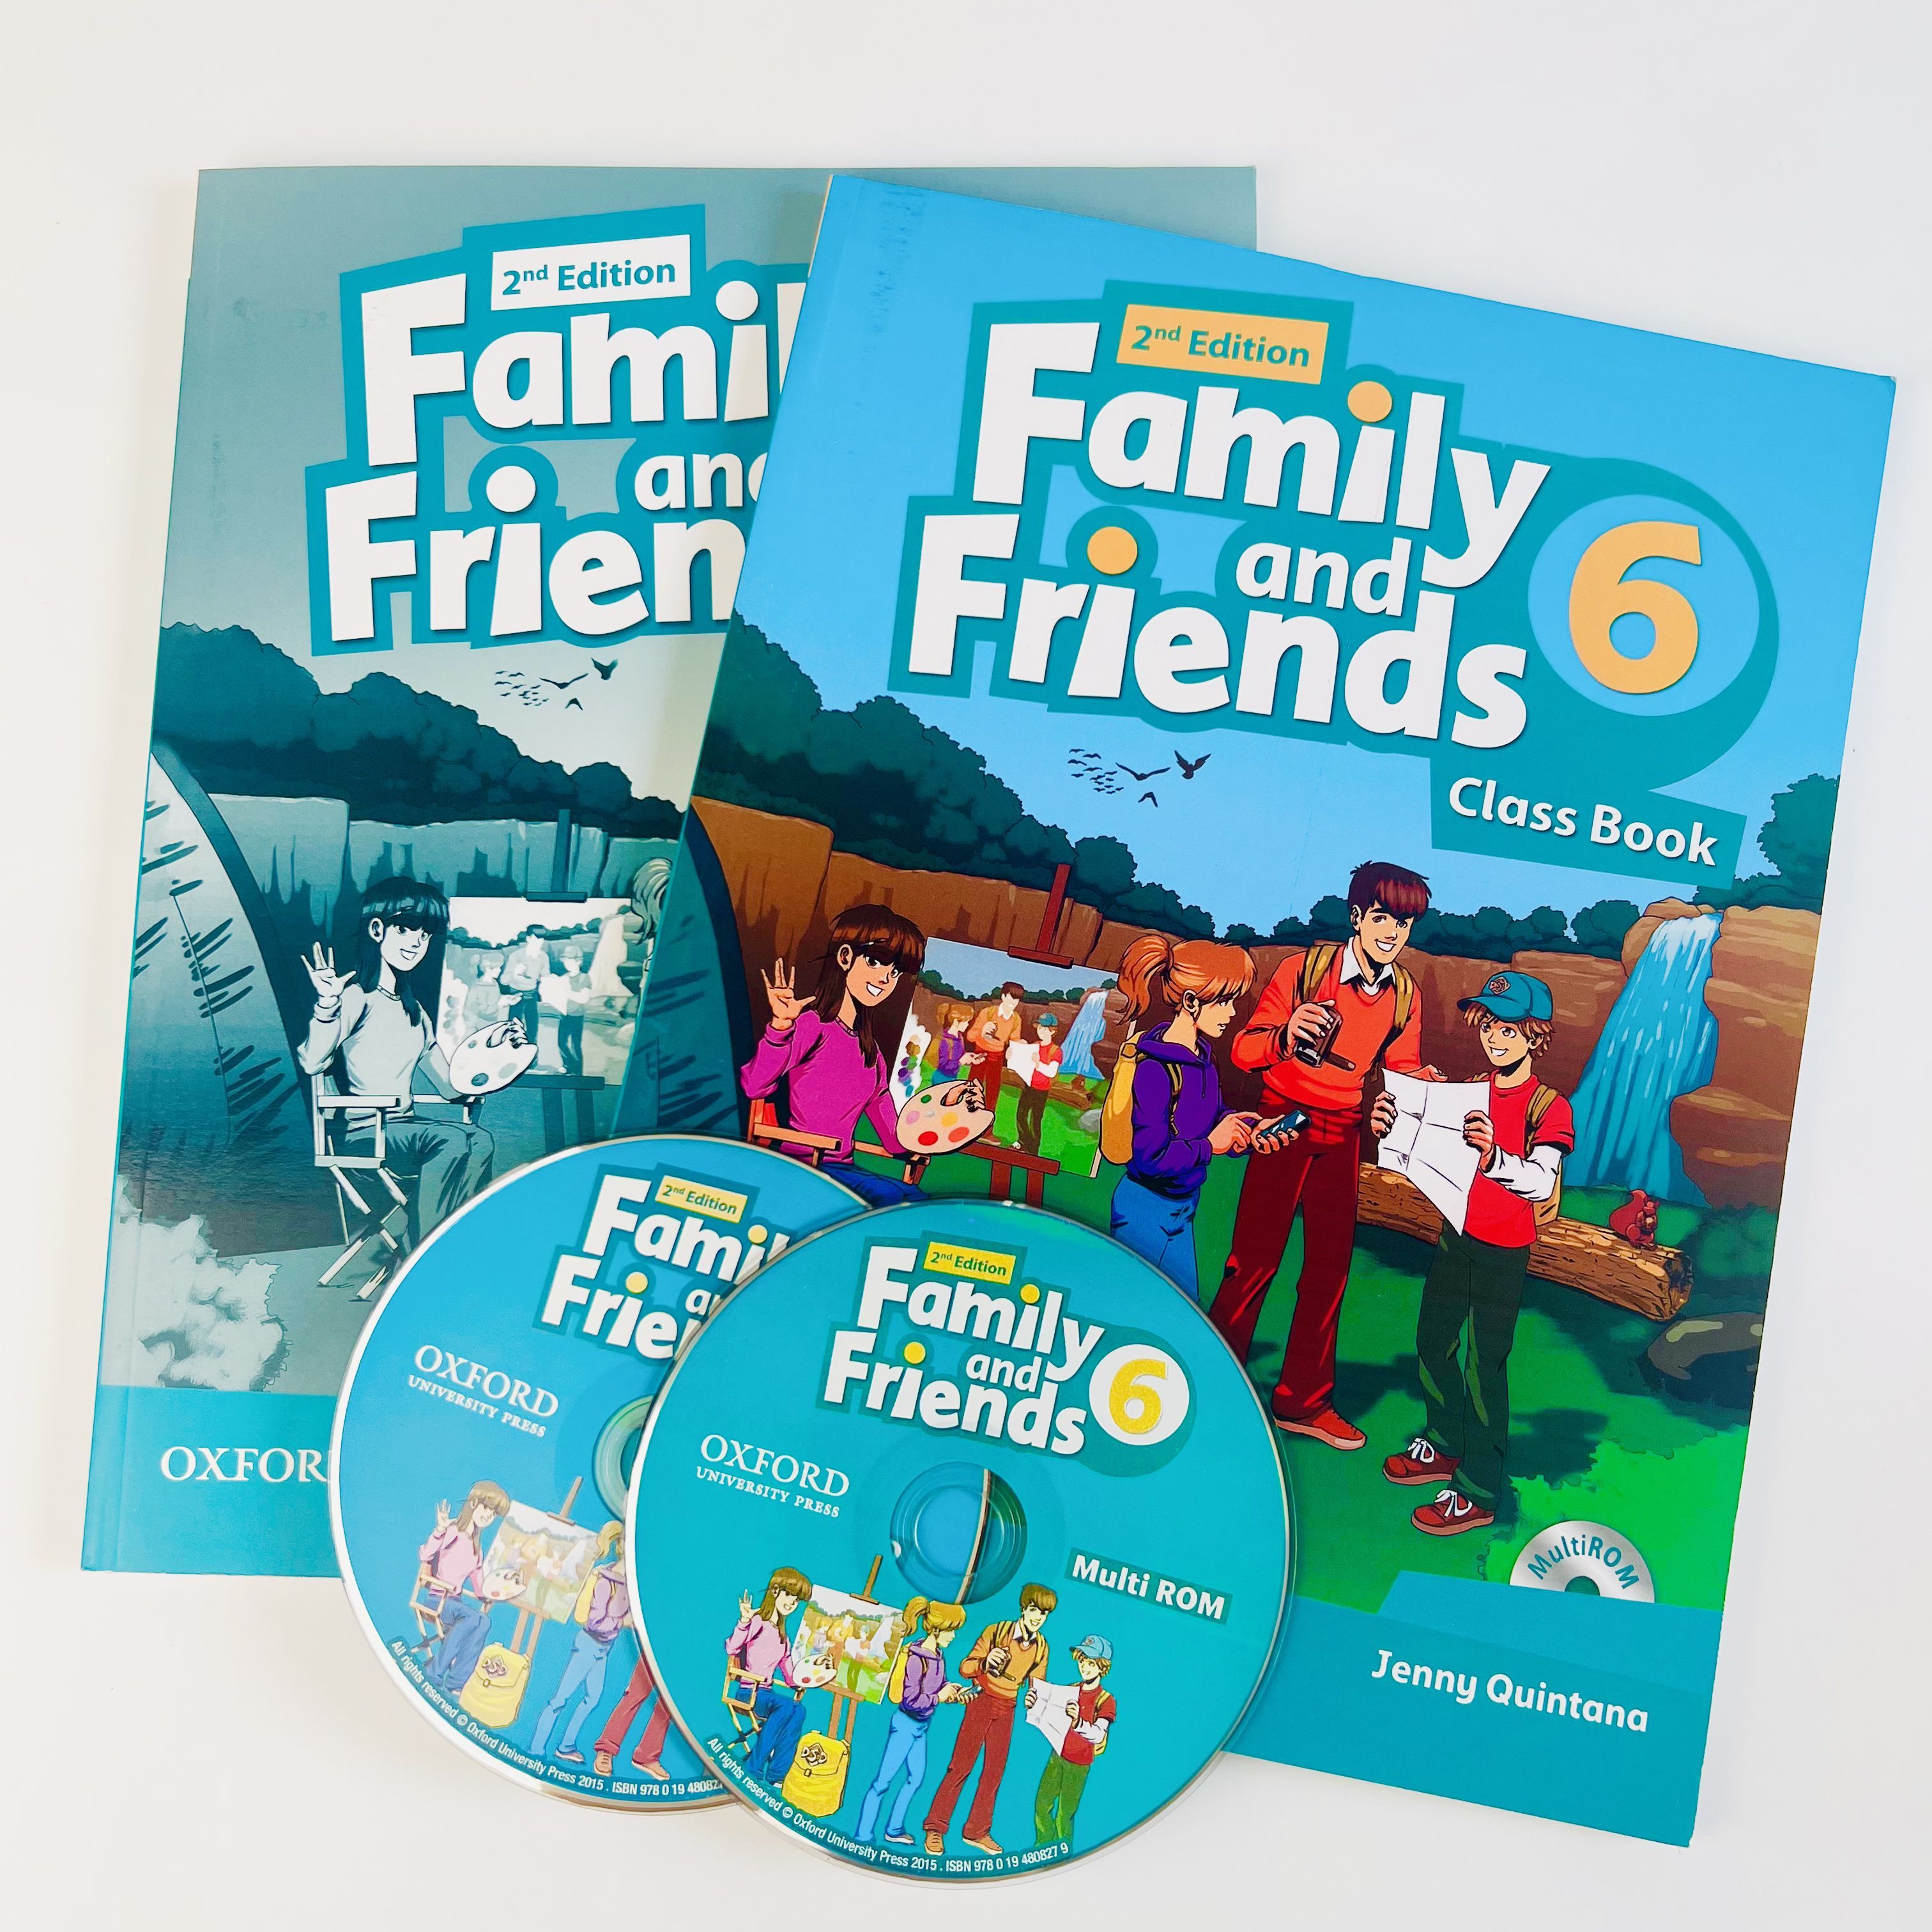 Friends level. Family and friends: Level 6. Книга Family and friends 3 страница 55. Книга Family and friends 1 107 страница.